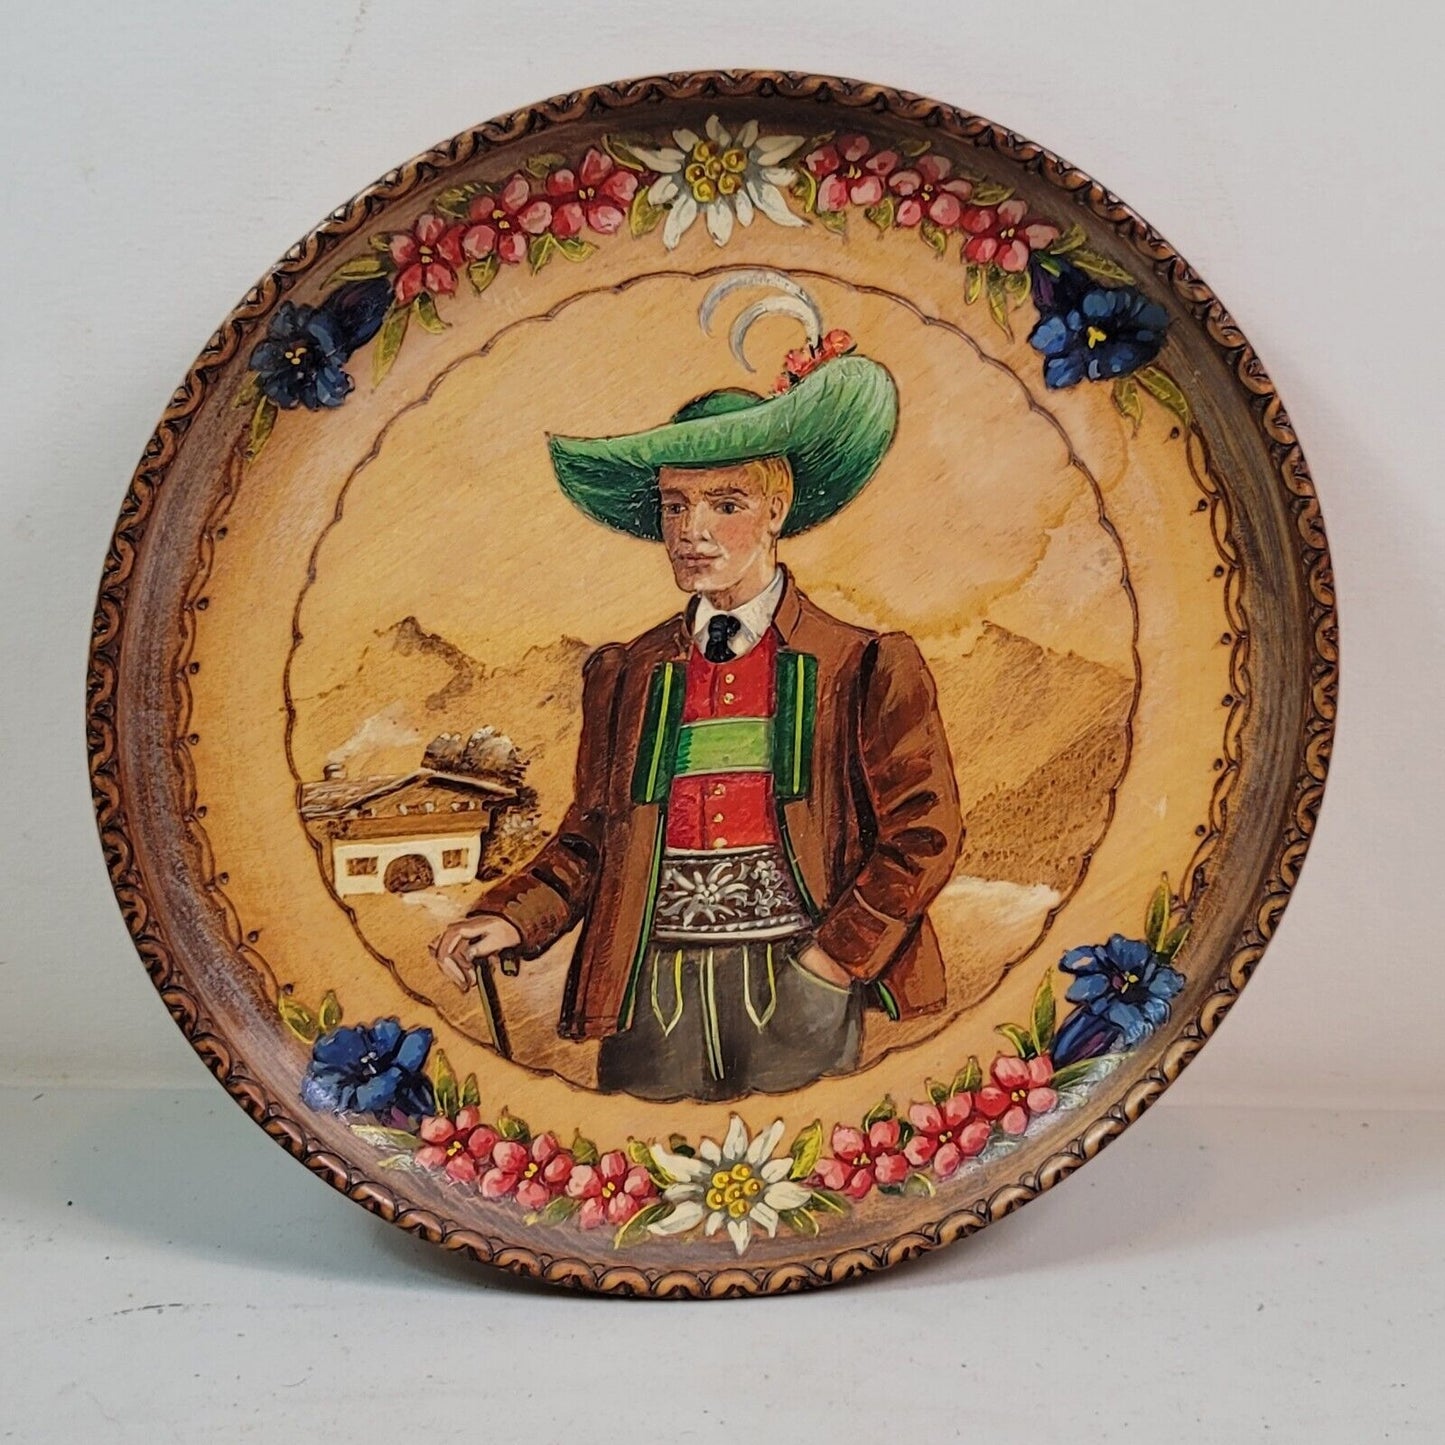 Austria Handcarved Handpainted Young Austrian Man Wooden Plate 10" Signed 1926